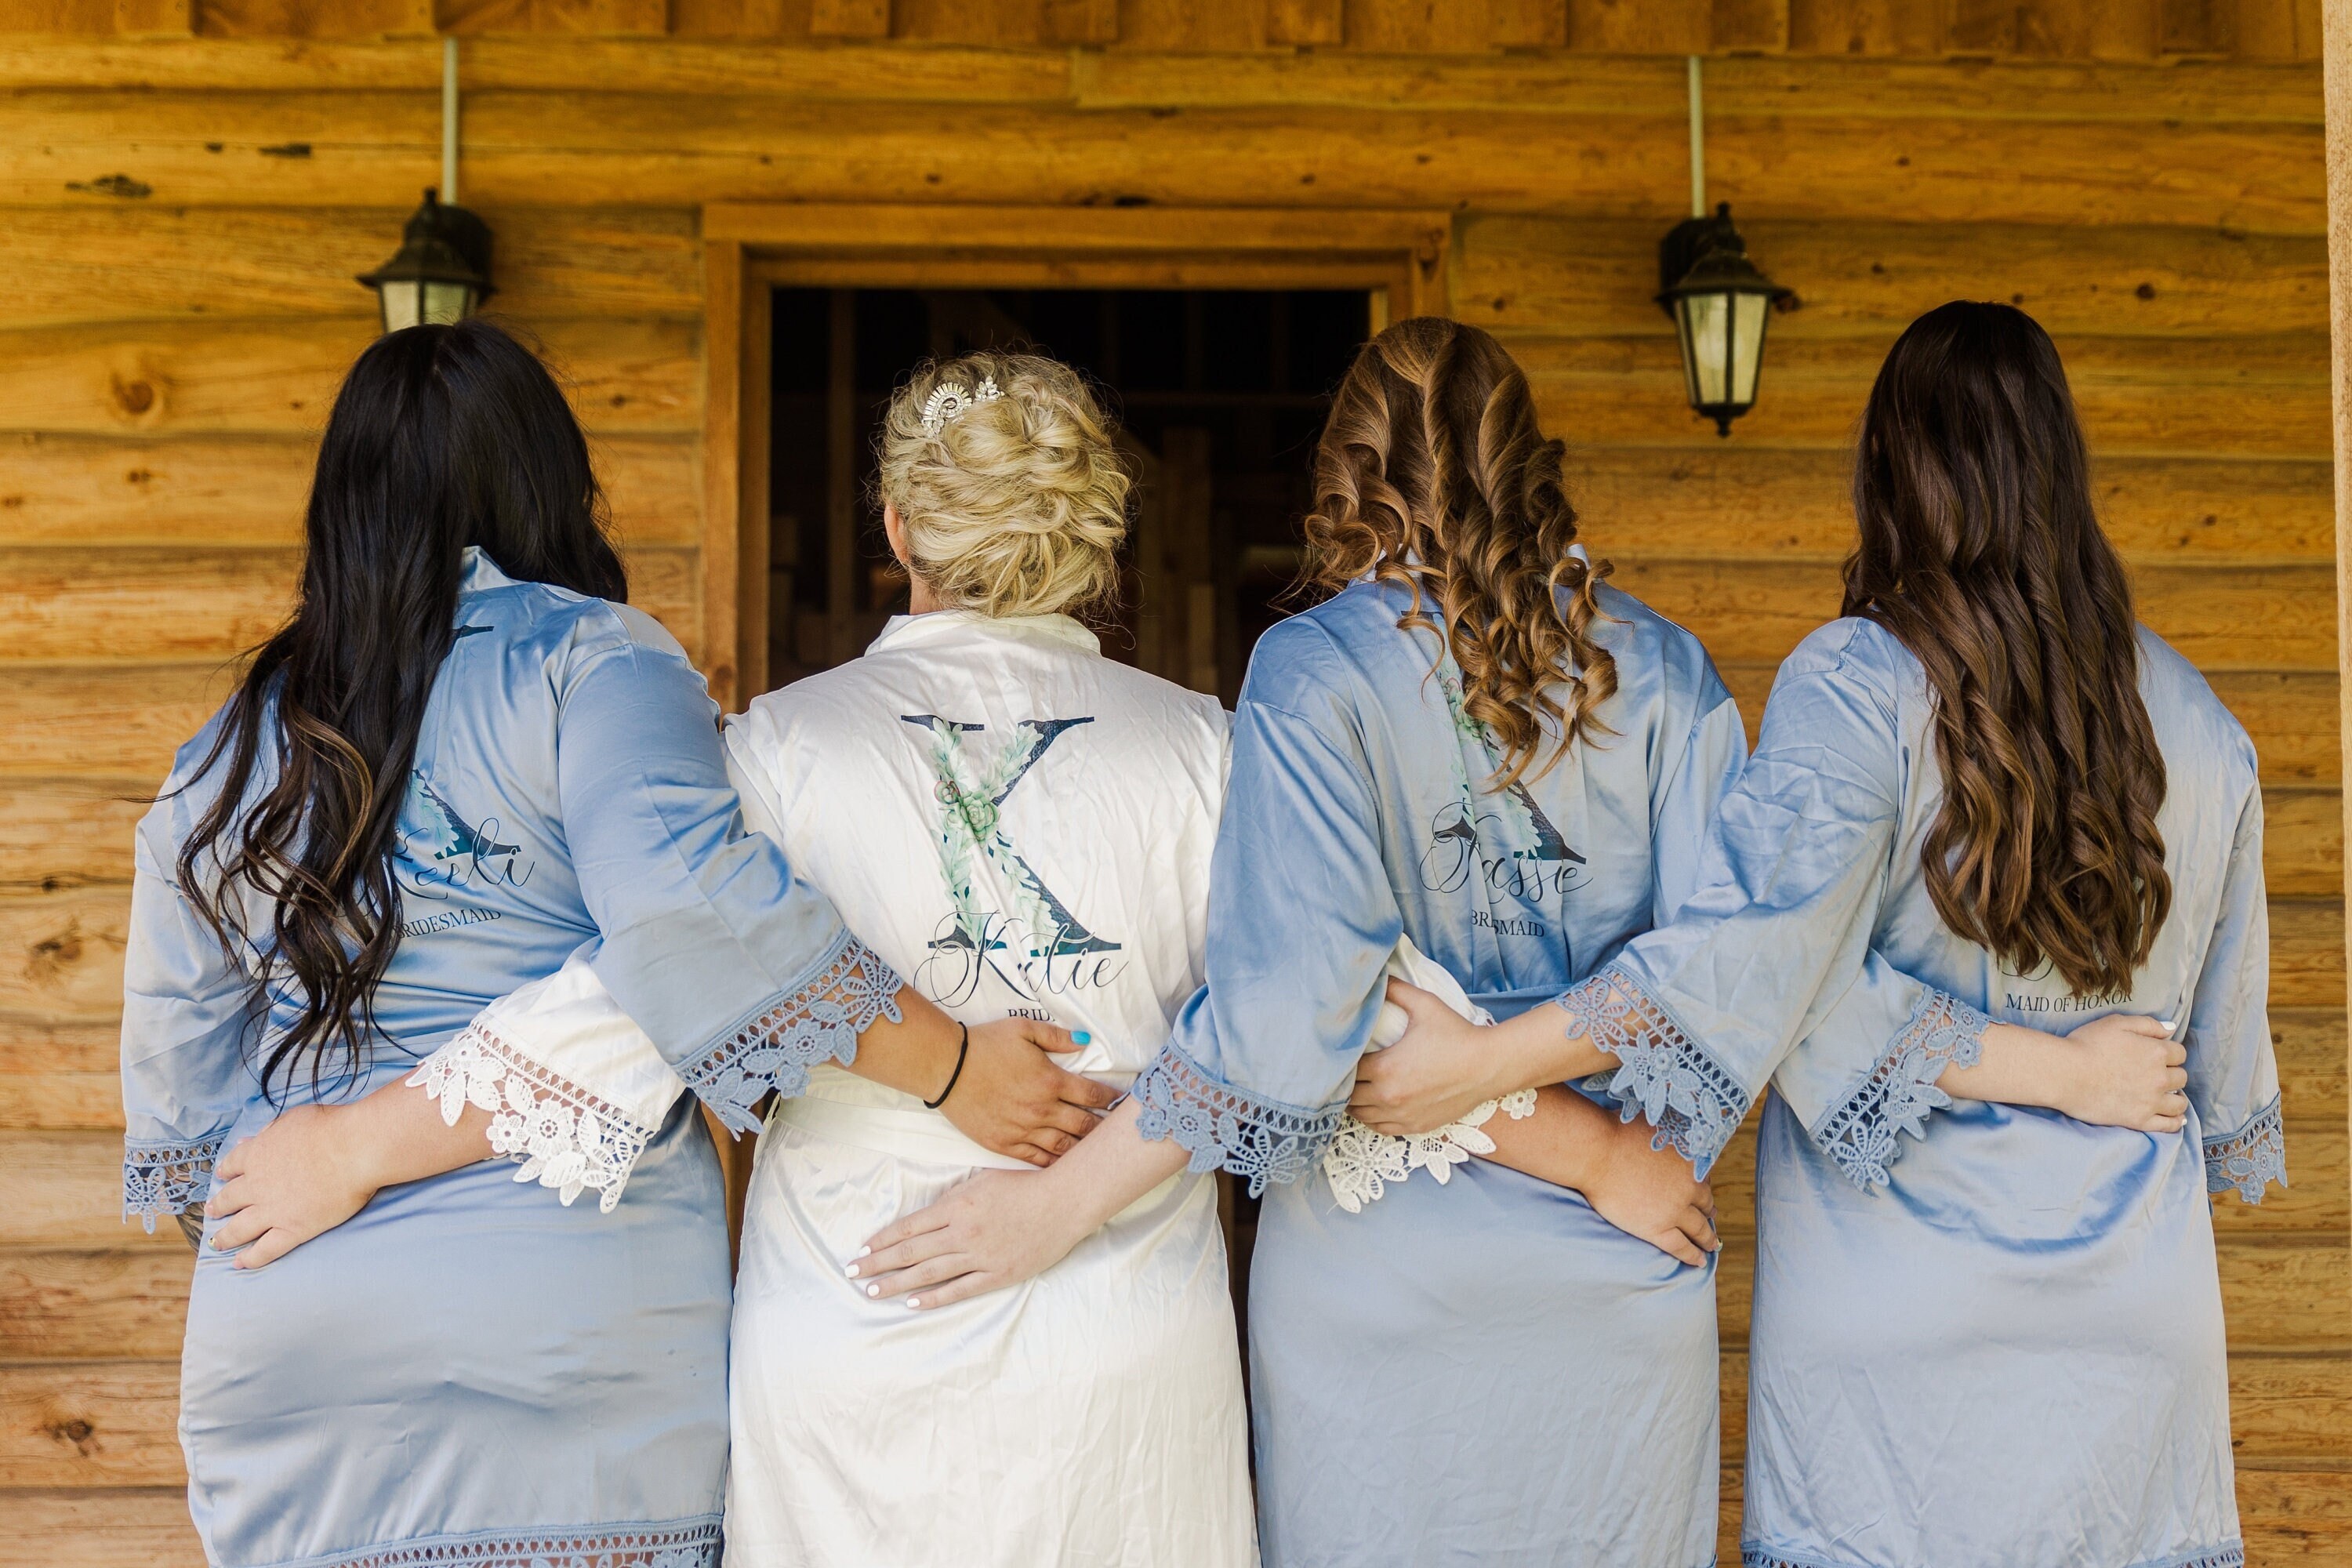 Dusty Blue Bridesmaid Robes, Personalized Robes, Bridesmaid Gift,  Bridesmaids Robes, Bridesmaid Proposal, Custom Bridal Robes 